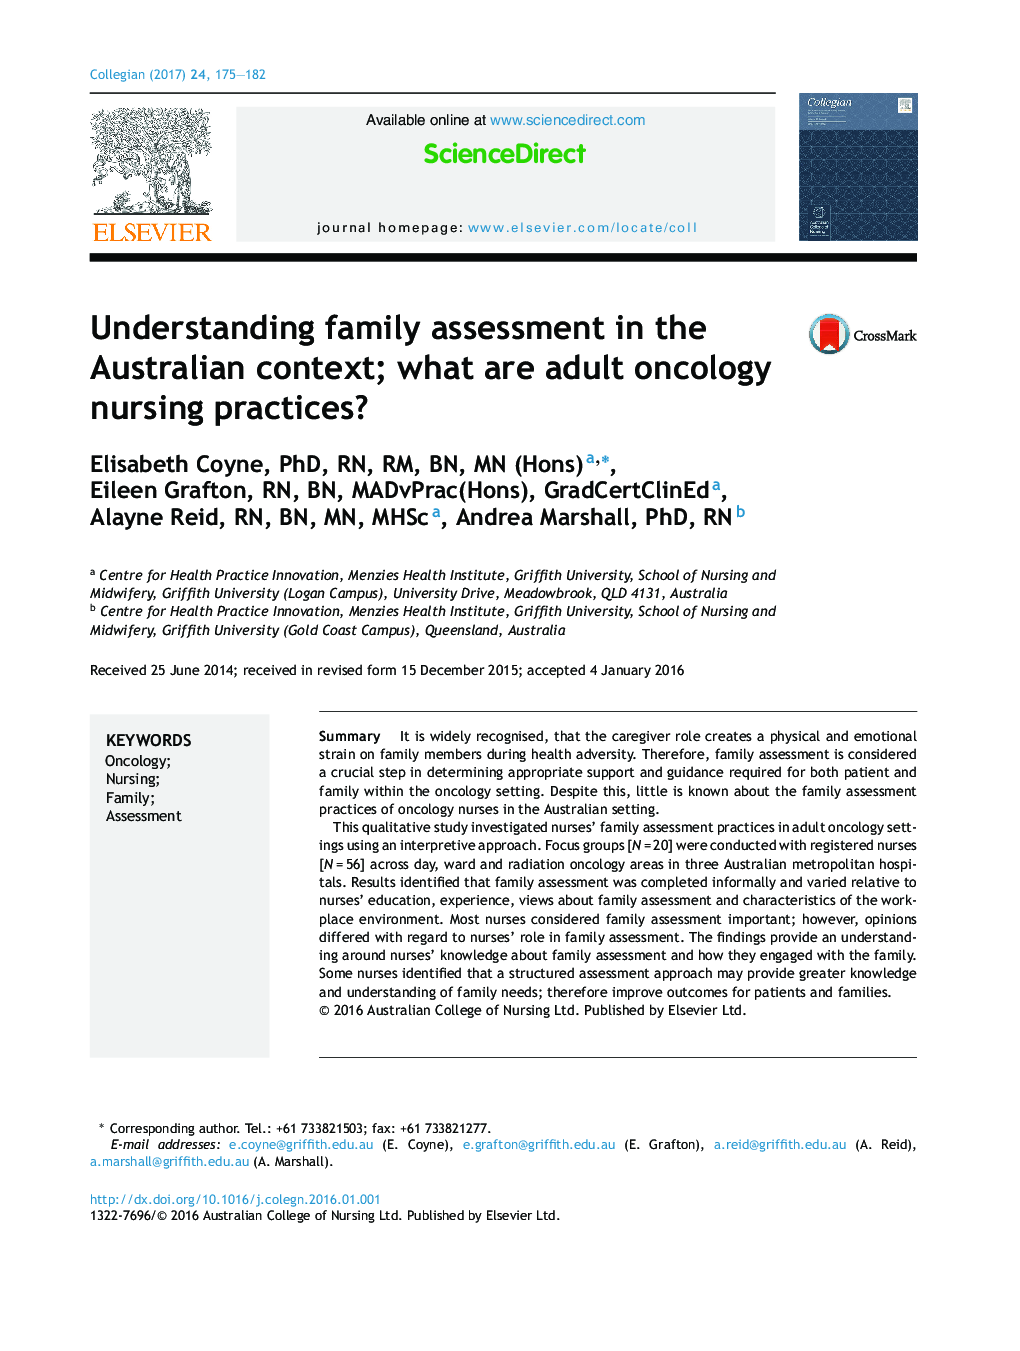 Understanding family assessment in the Australian context; what are adult oncology nursing practices?